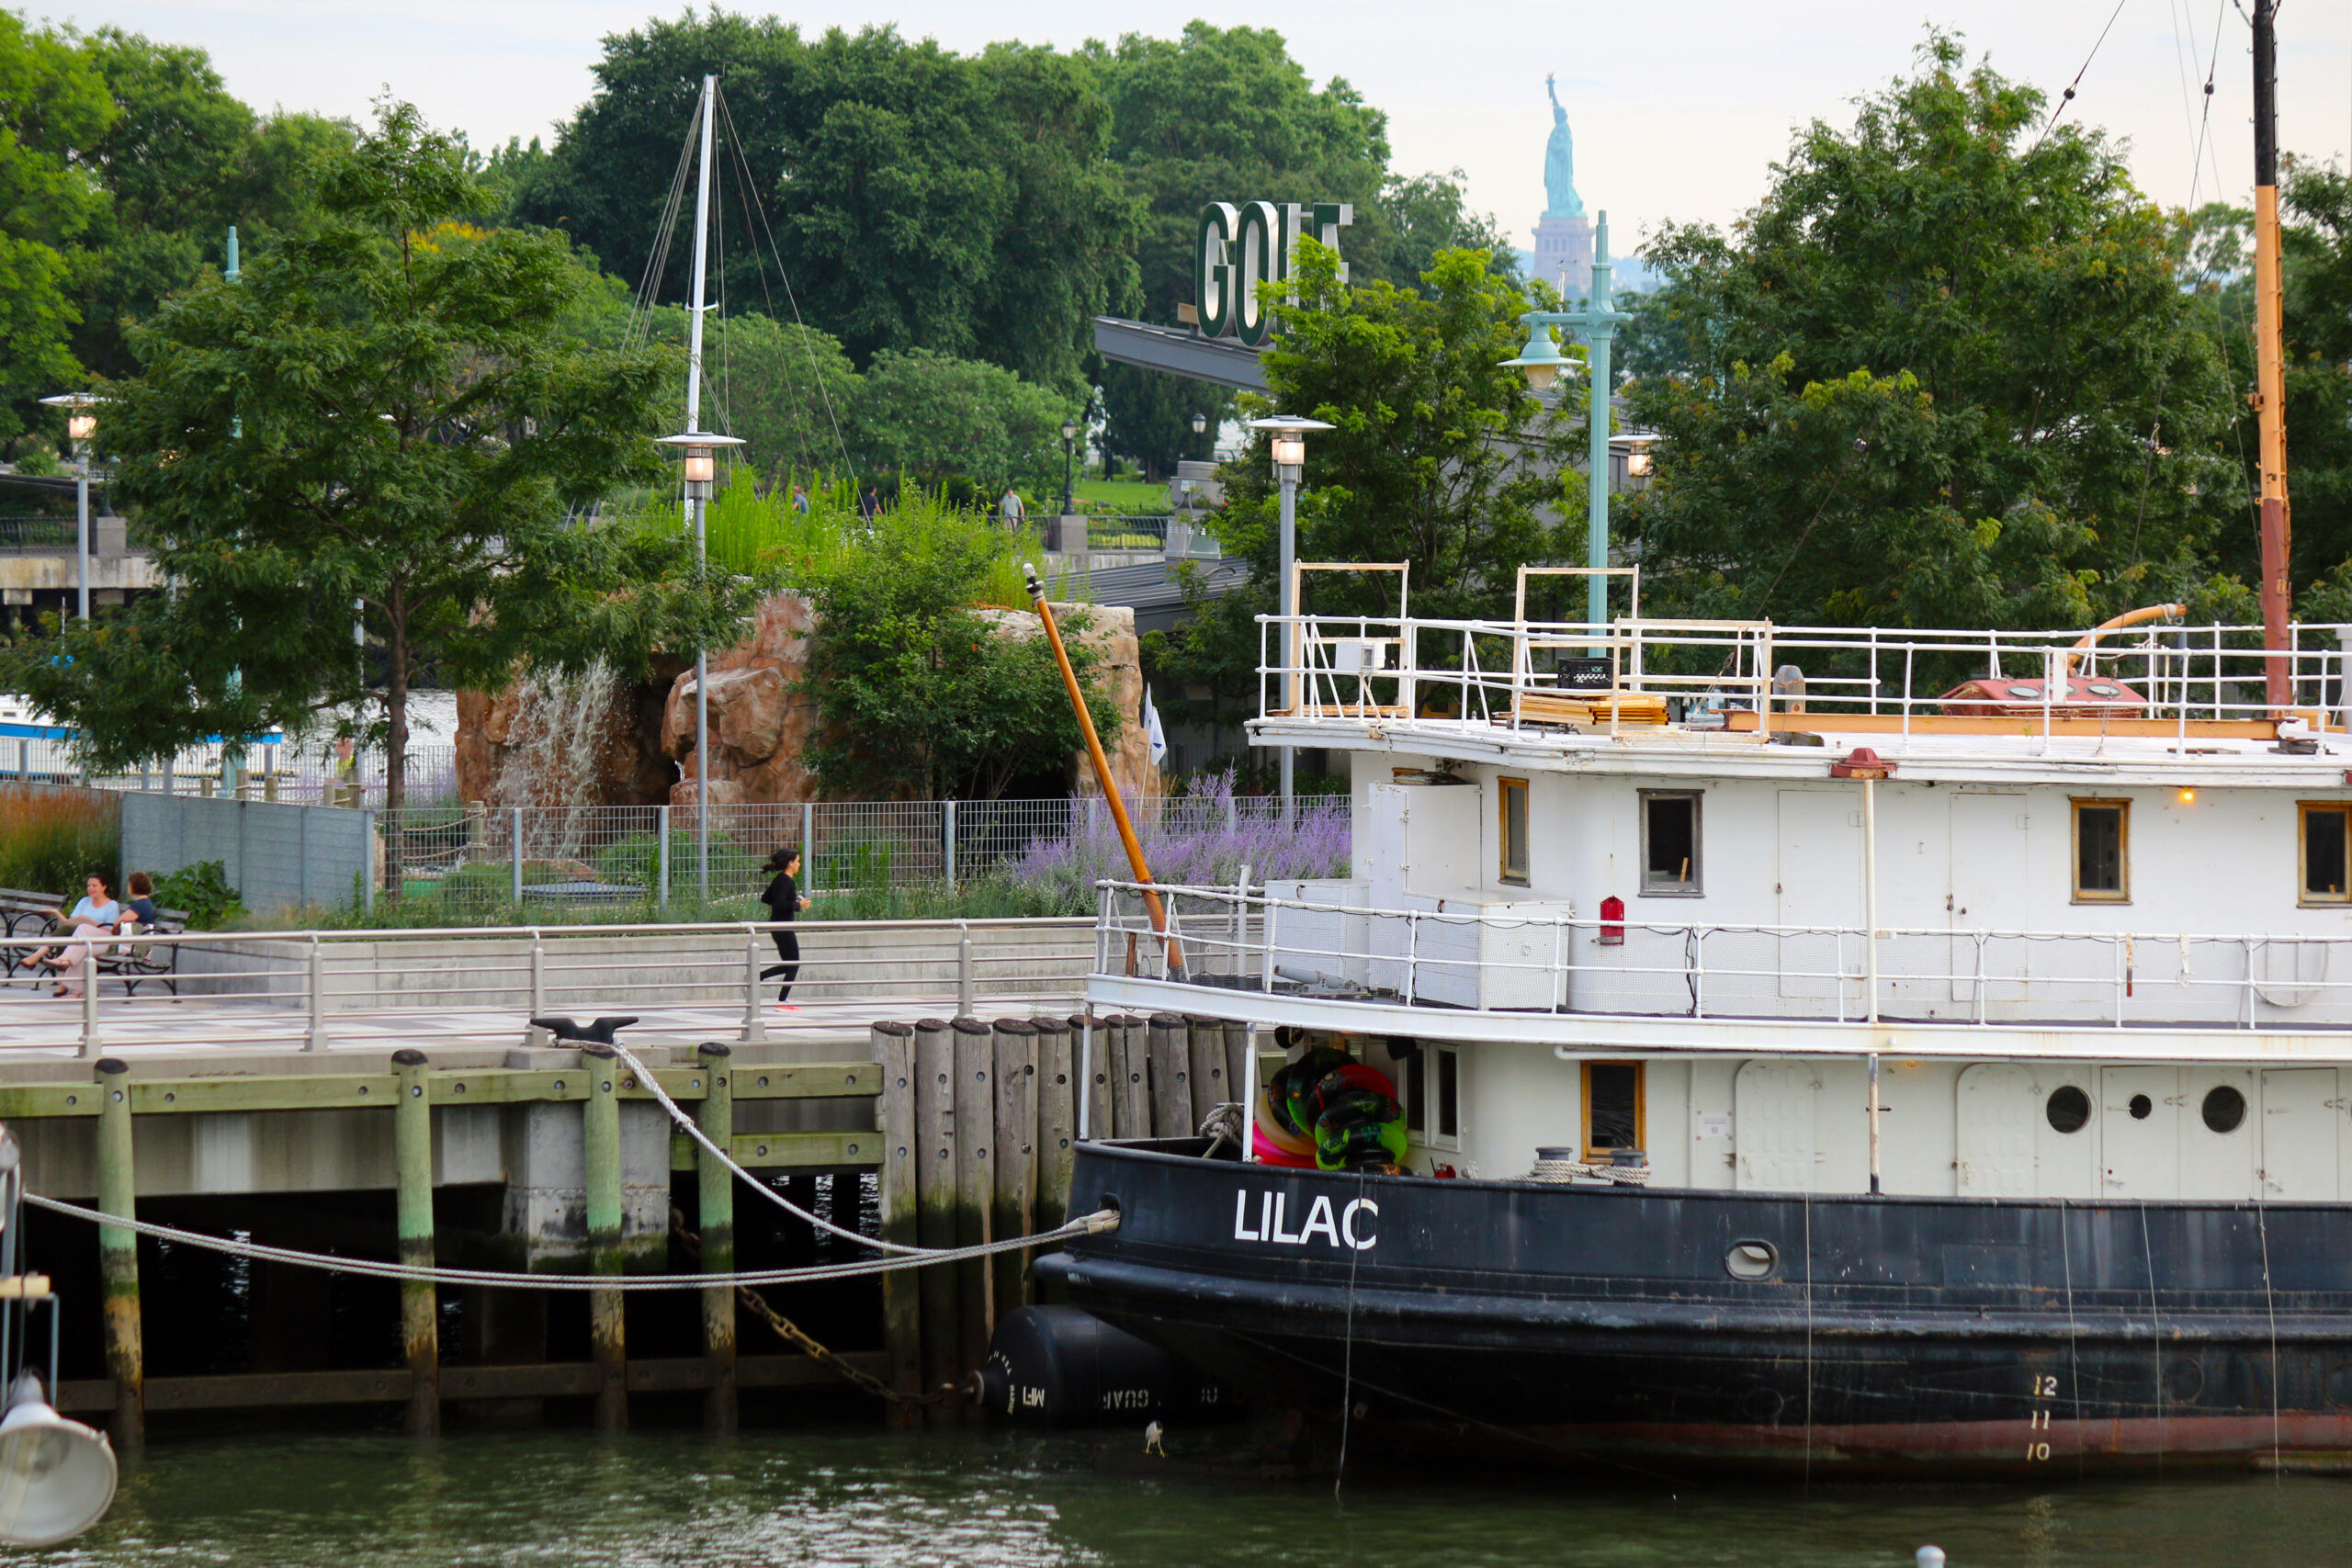 The Lilac, a steam powered lighthouse tender, docked at Hudson River Park's Pier 25